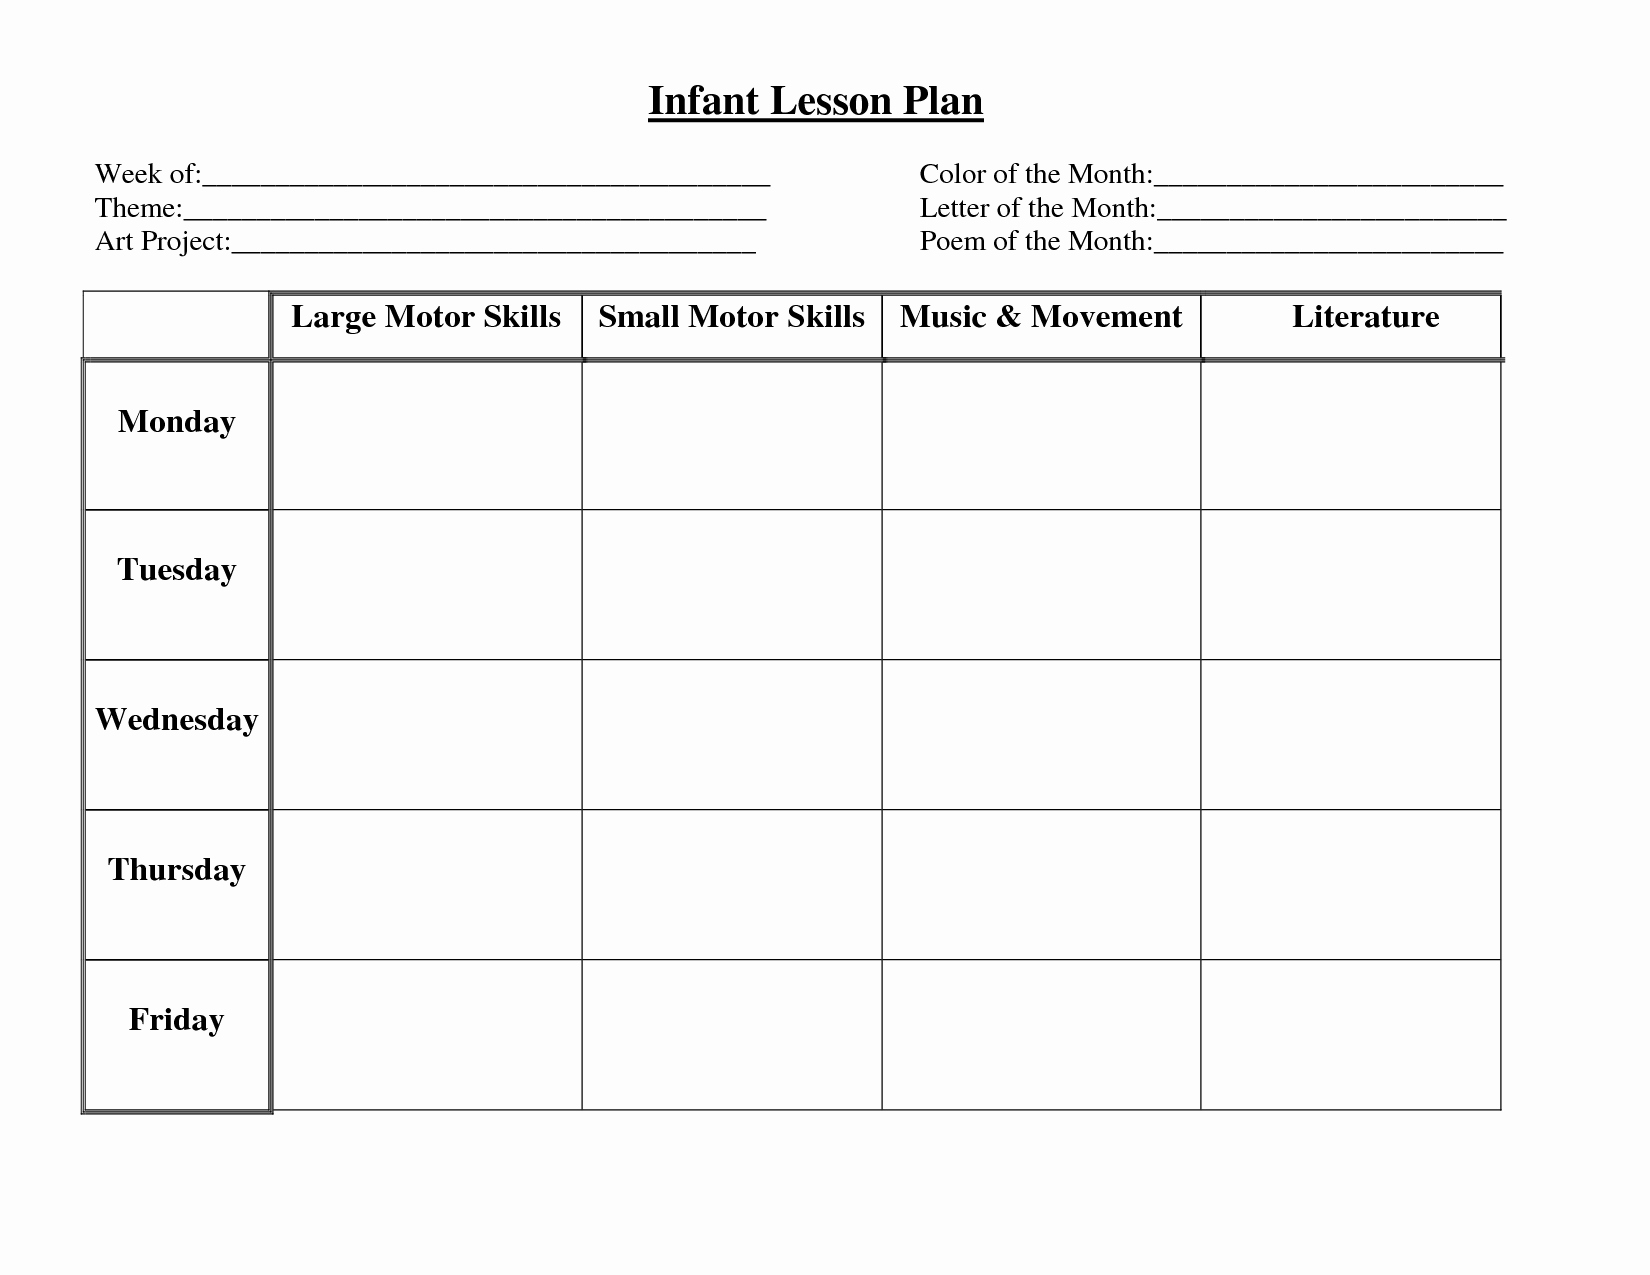 Lesson Plans for toddlers Template Elegant Infant Blank Lesson Plan Sheets